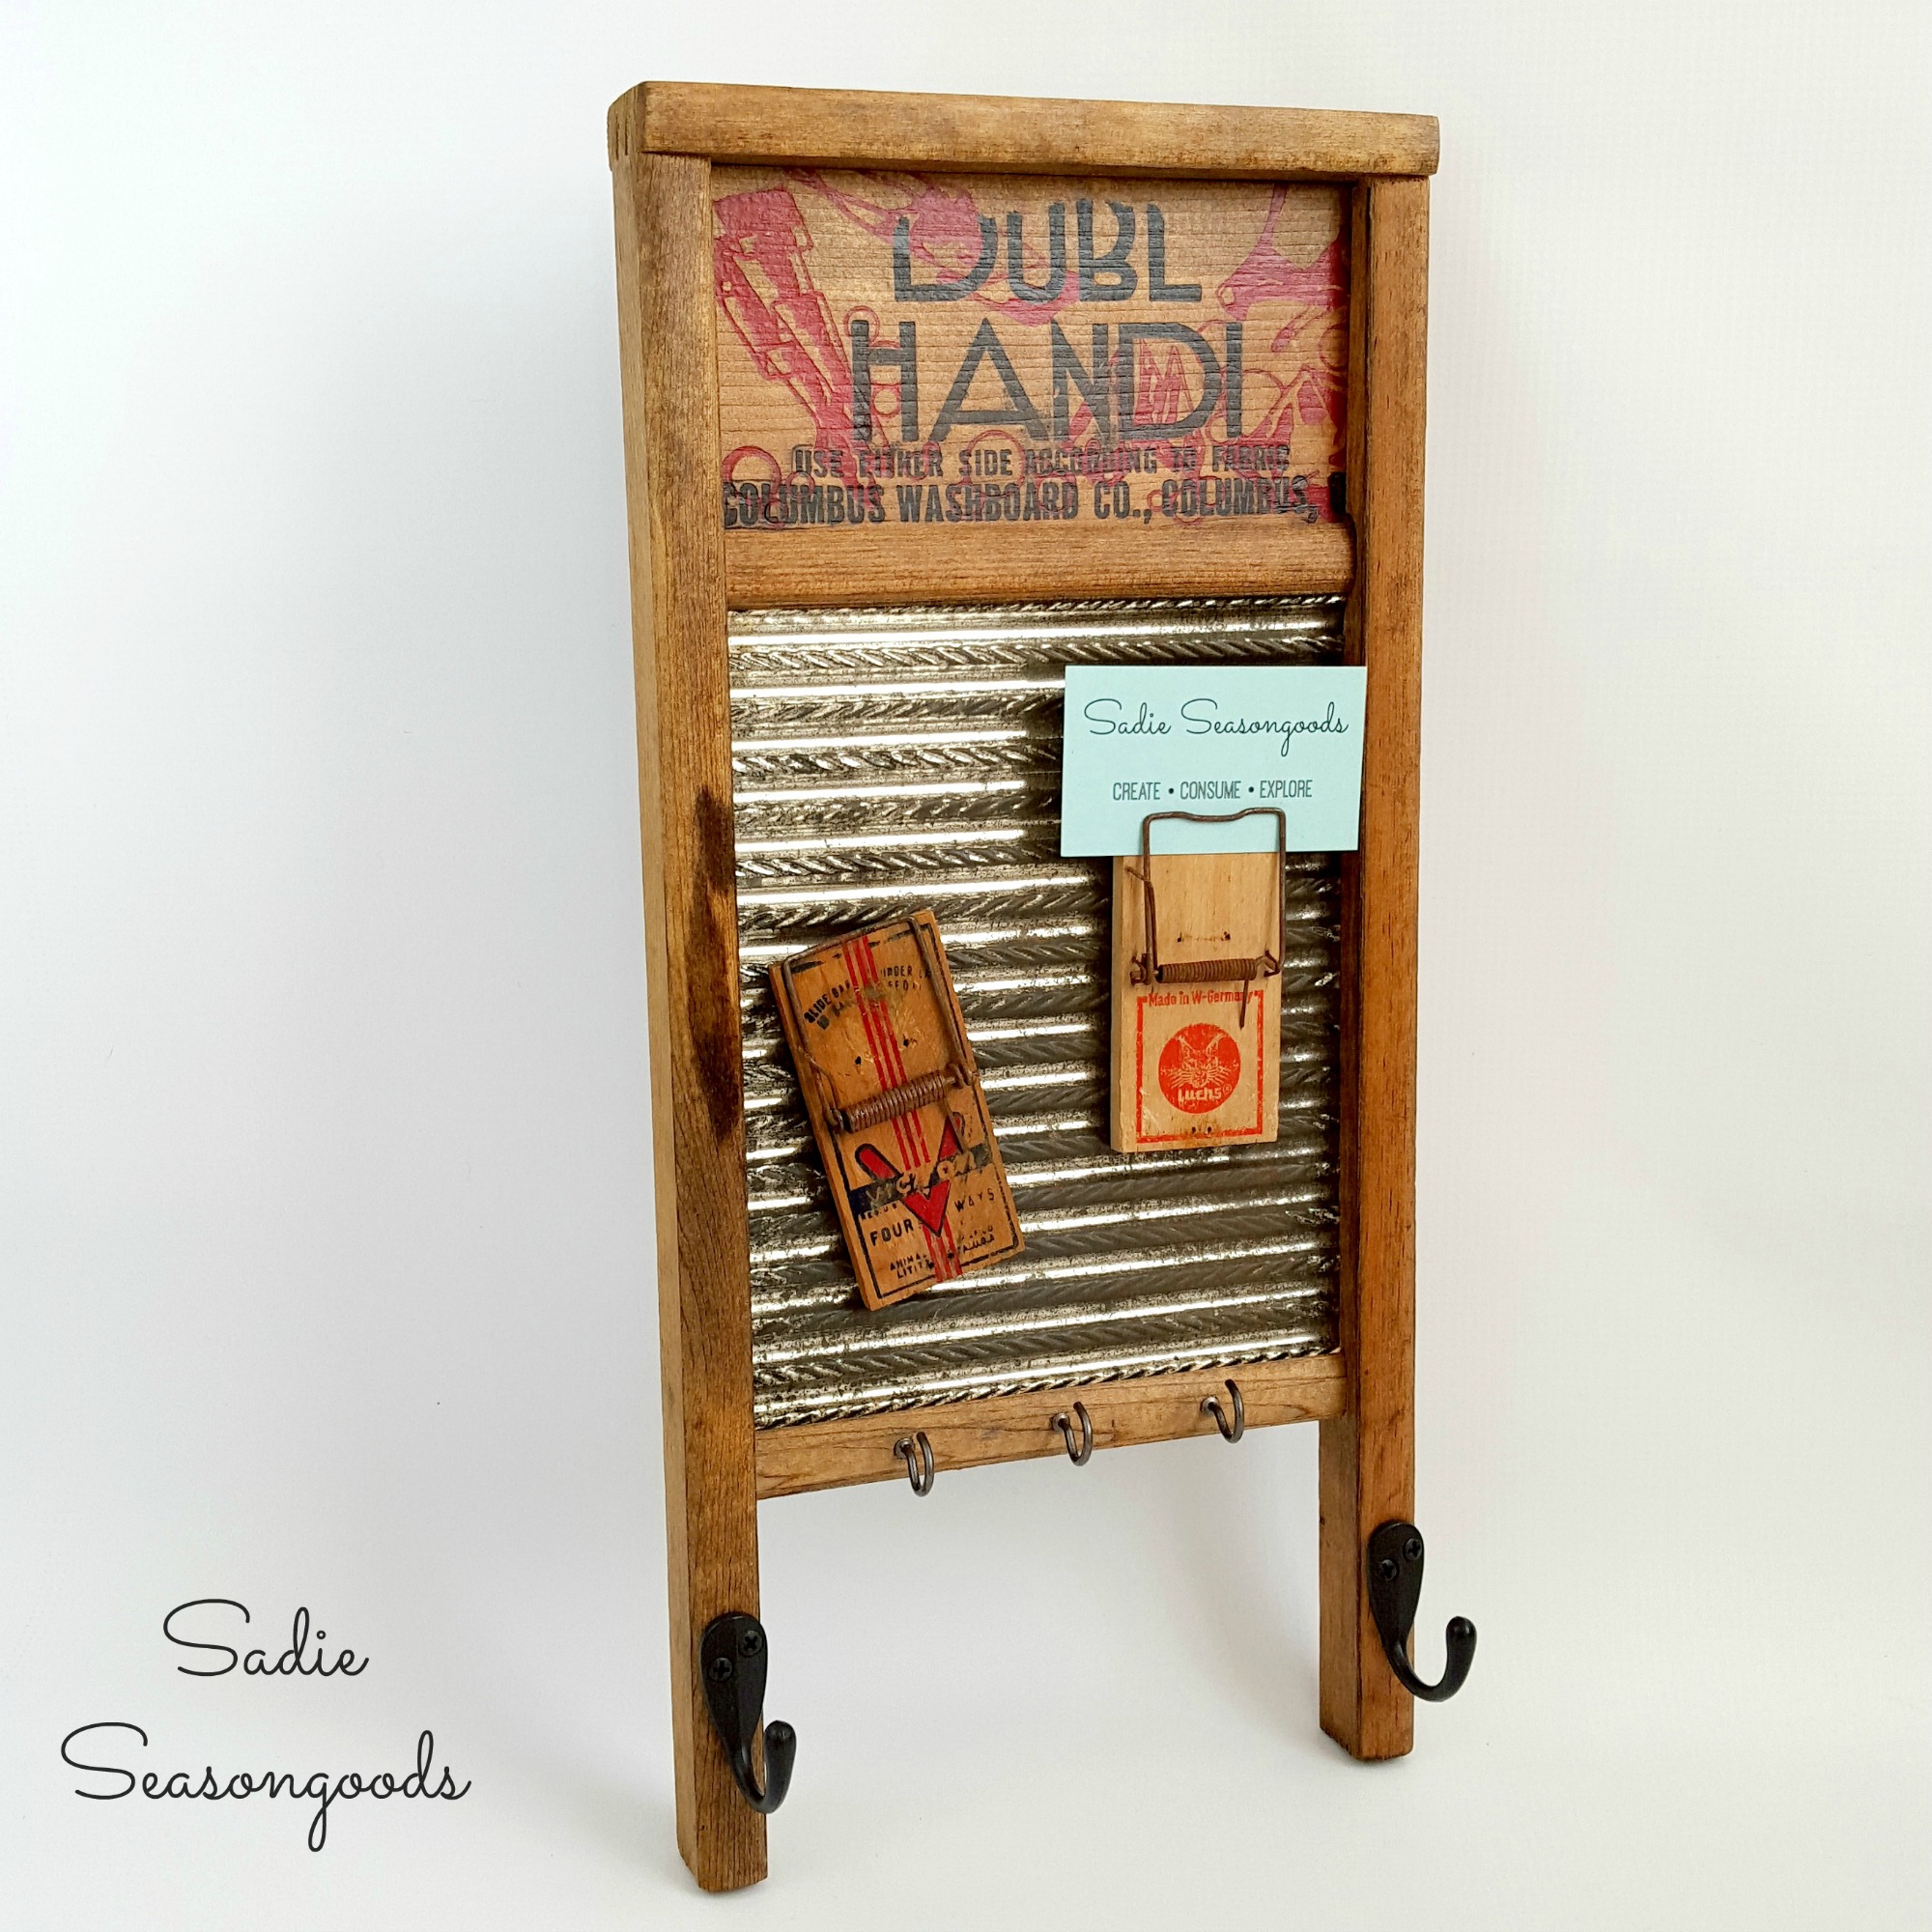 http://thecottagemarket.com/wp-content/uploads/2016/05/Creating_a_farmhouse_message_reminder_center_with_repurposed_vintage_washboard_and_mousetraps_by_Sadie_Seasongoods-1.jpg